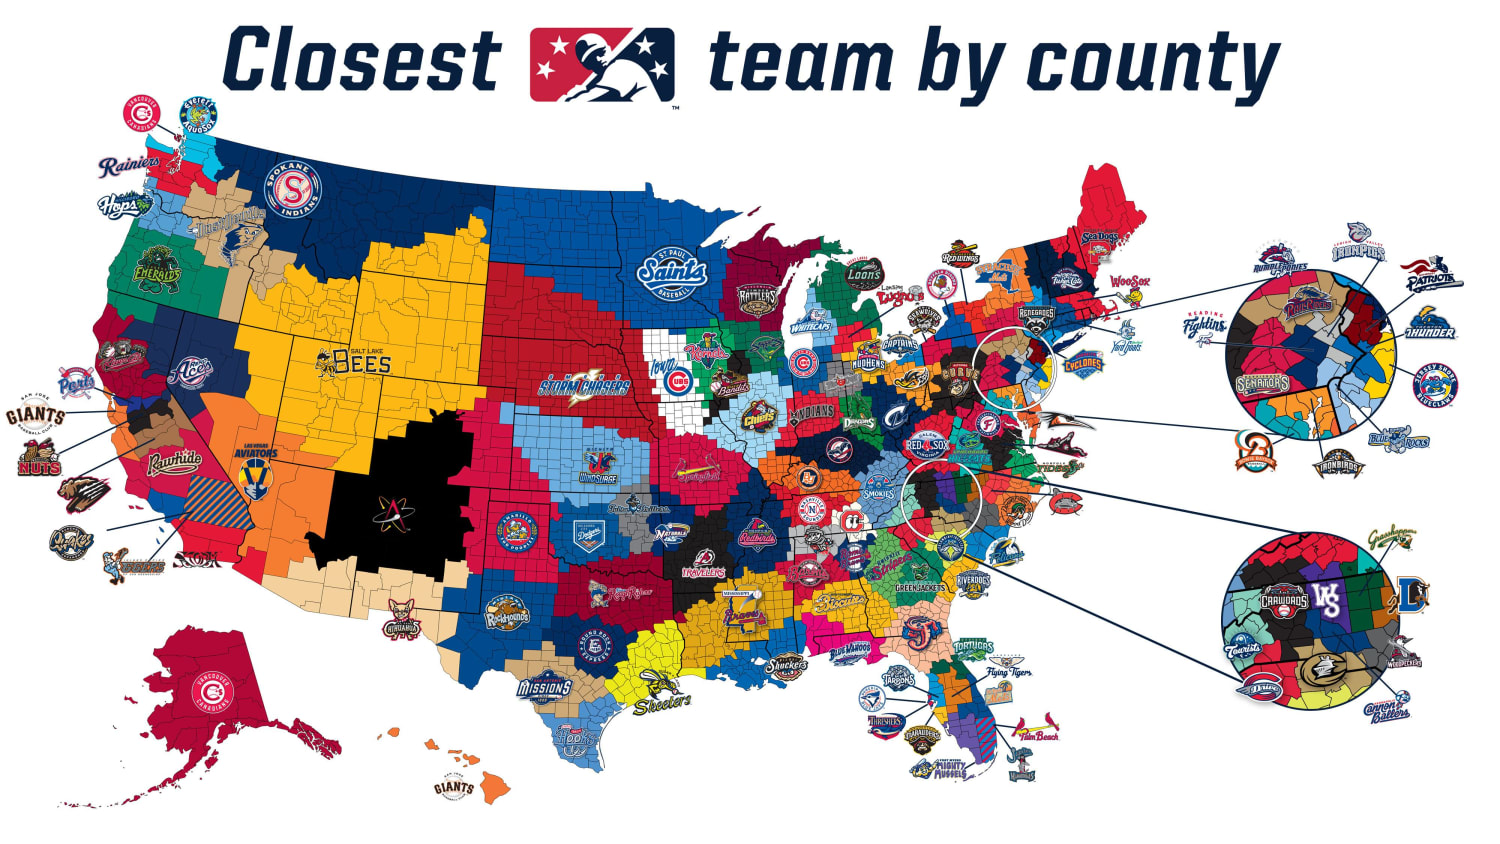 Closest Minor League Baseball Team by County